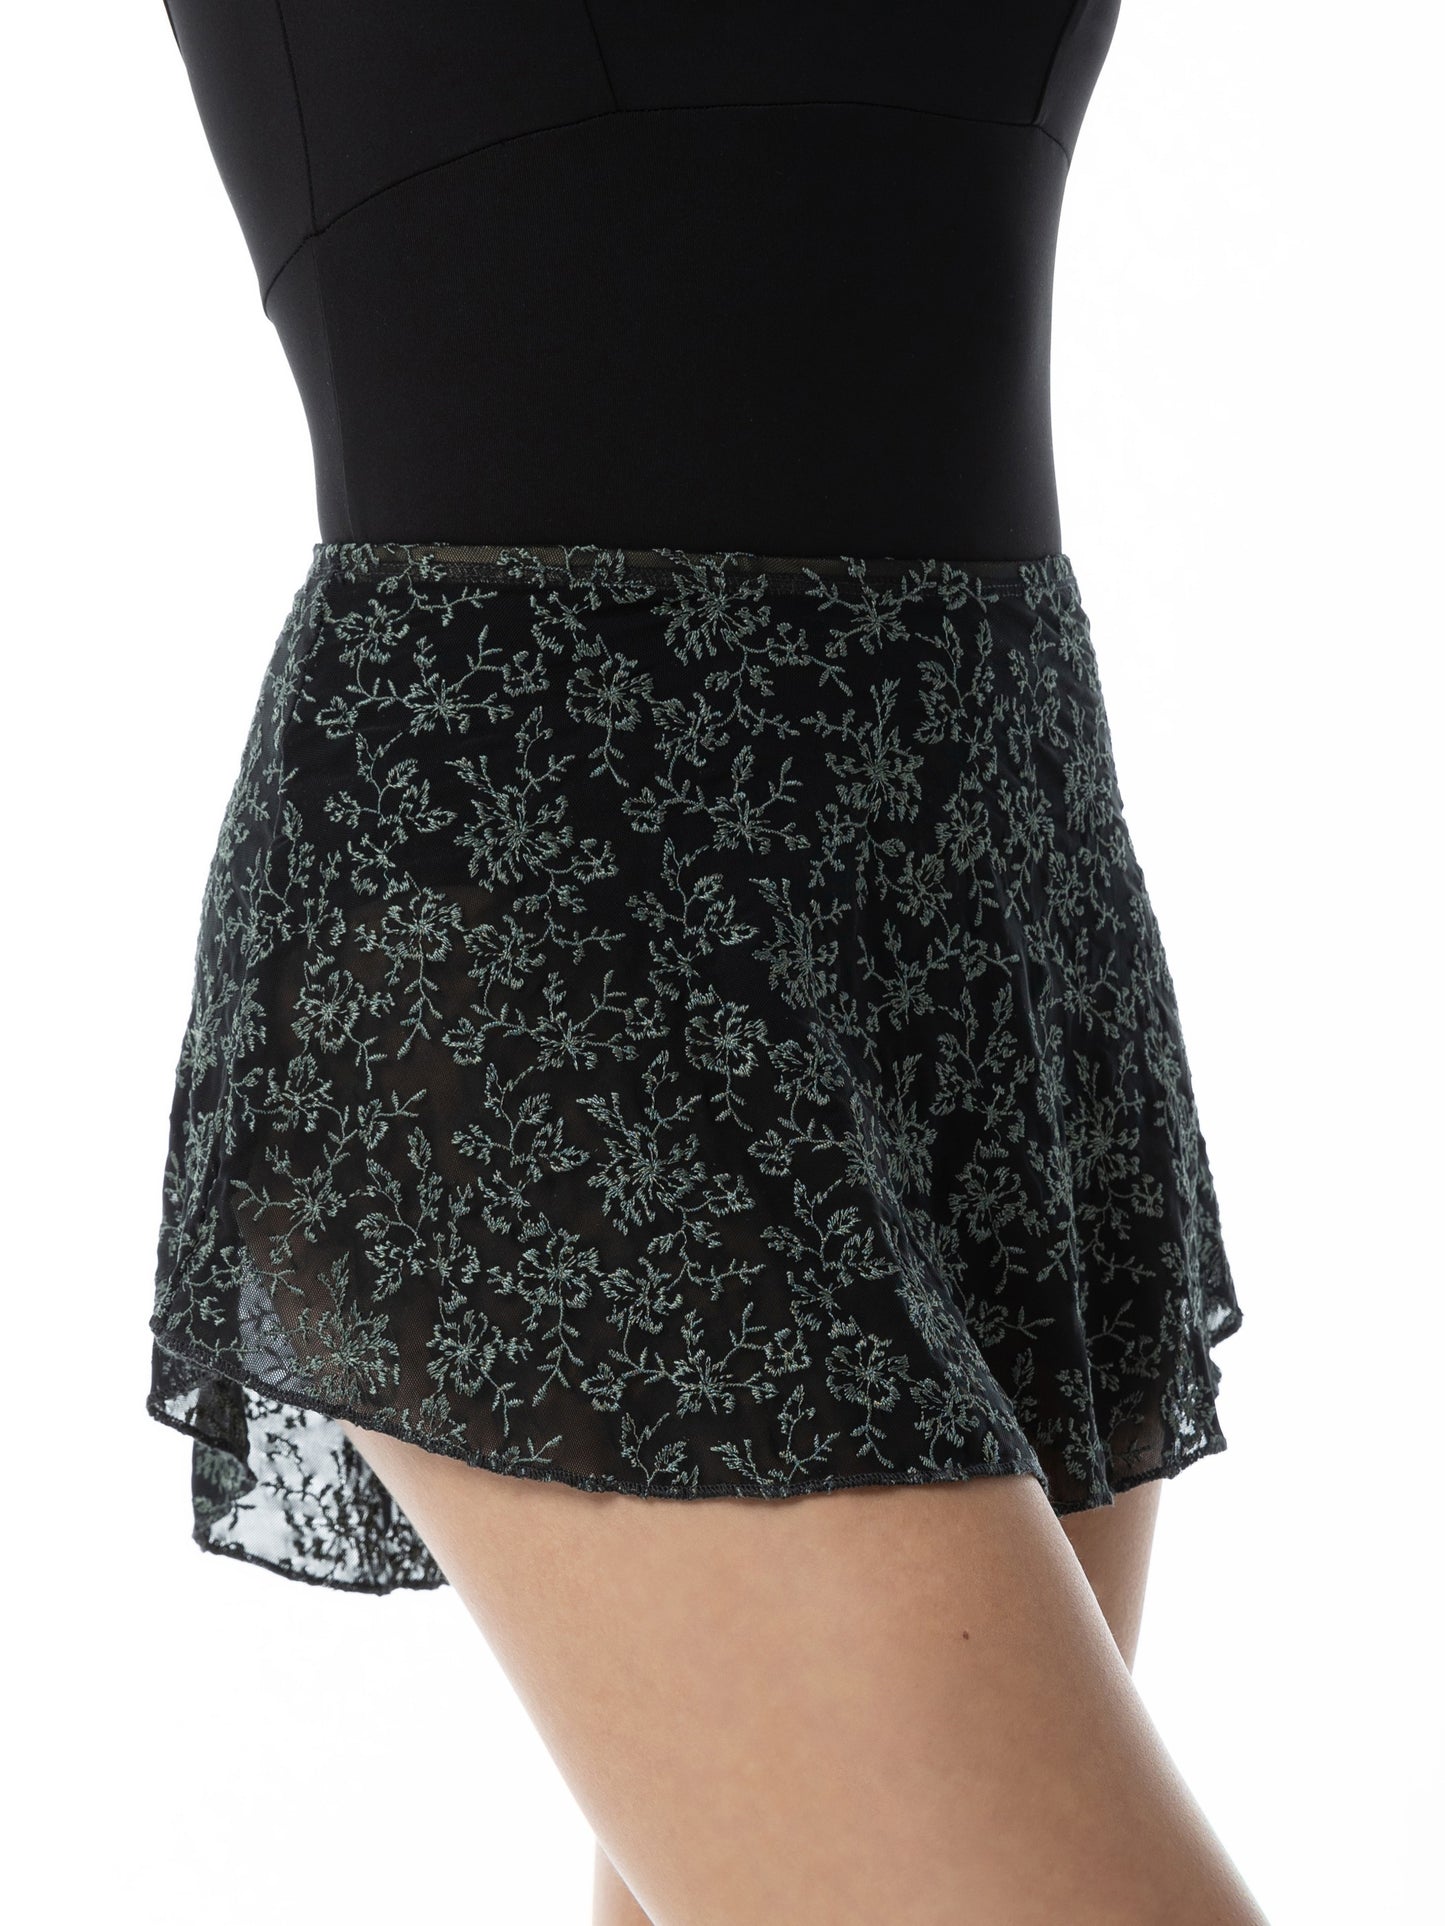 Darling Pull-on Embroidered Skirt - 1009A